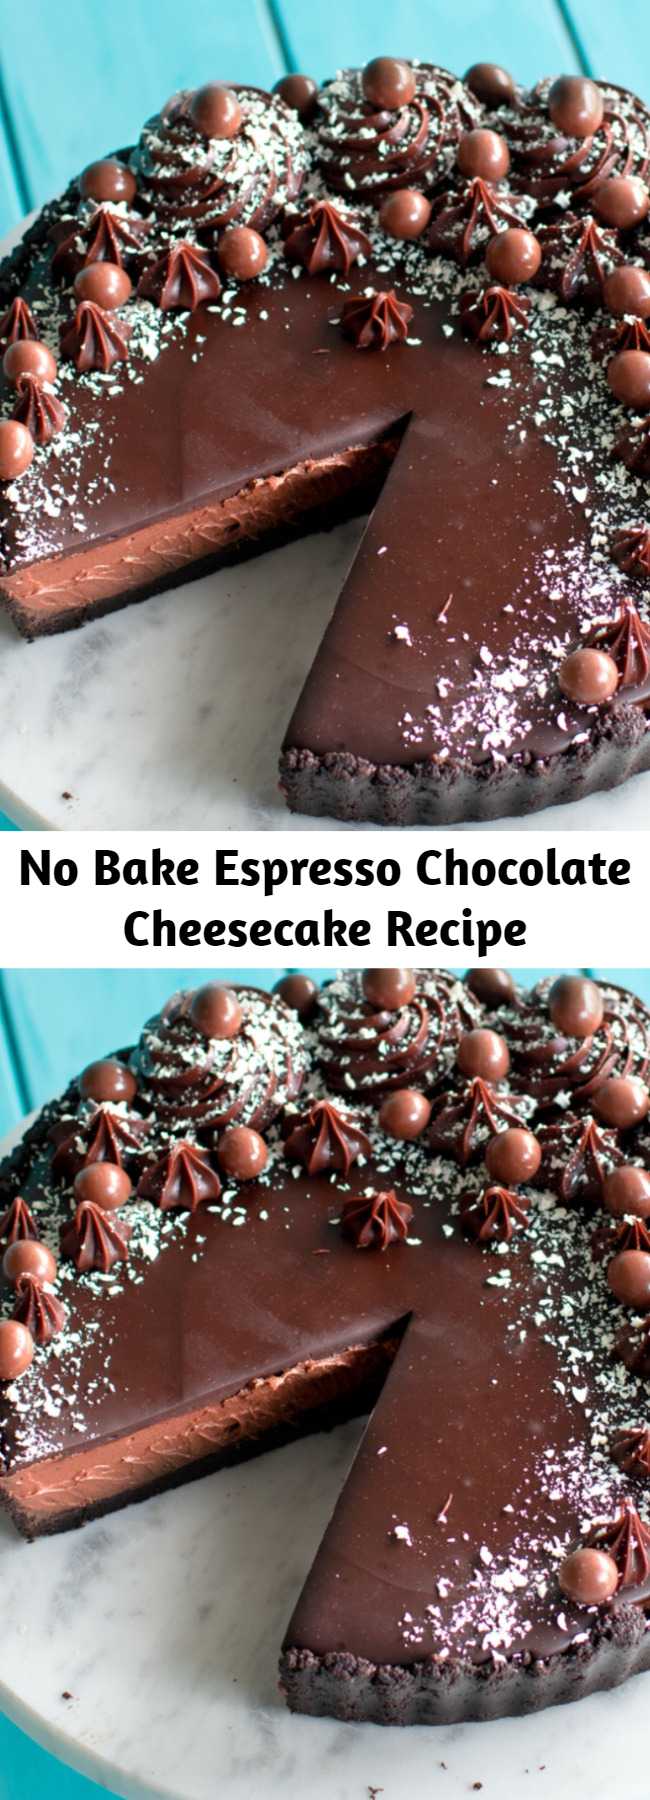 No Bake Espresso Chocolate Cheesecake Recipe - Espresso your love for cheesecake, chocolate & coffee, all in one dessert. This no-bake espresso chocolate cheesecake is the perfect afternoon pick-me-up.